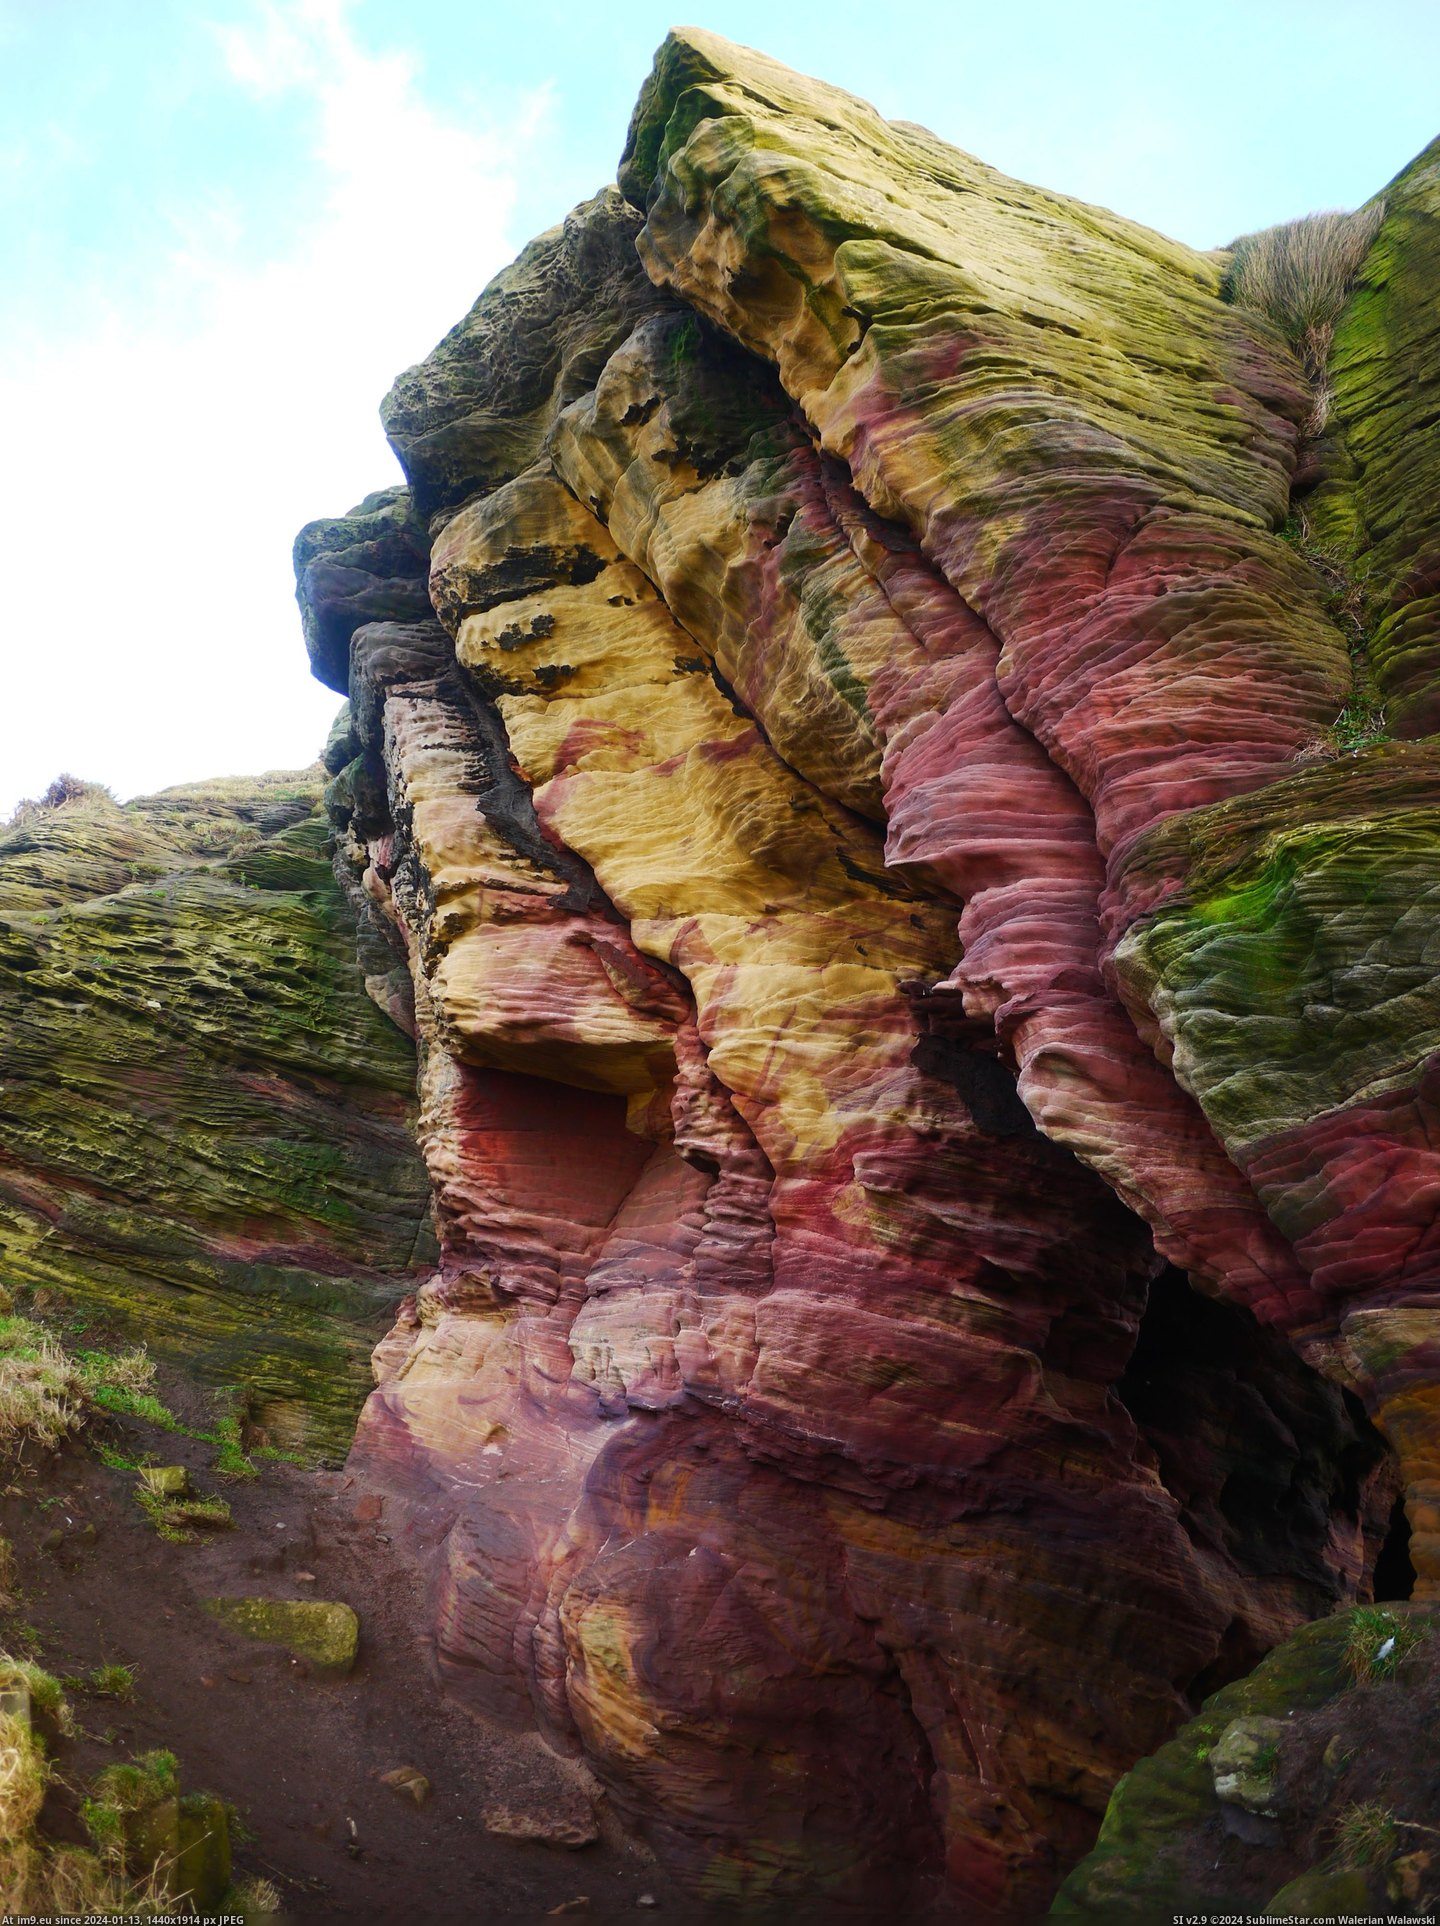 #Rock #Scotland #Anstruther #Colored #Formations [Earthporn] Colored rock formations near Anstruther, Scotland [3,000 x 4,000] [OC] Pic. (Изображение из альбом My r/EARTHPORN favs))